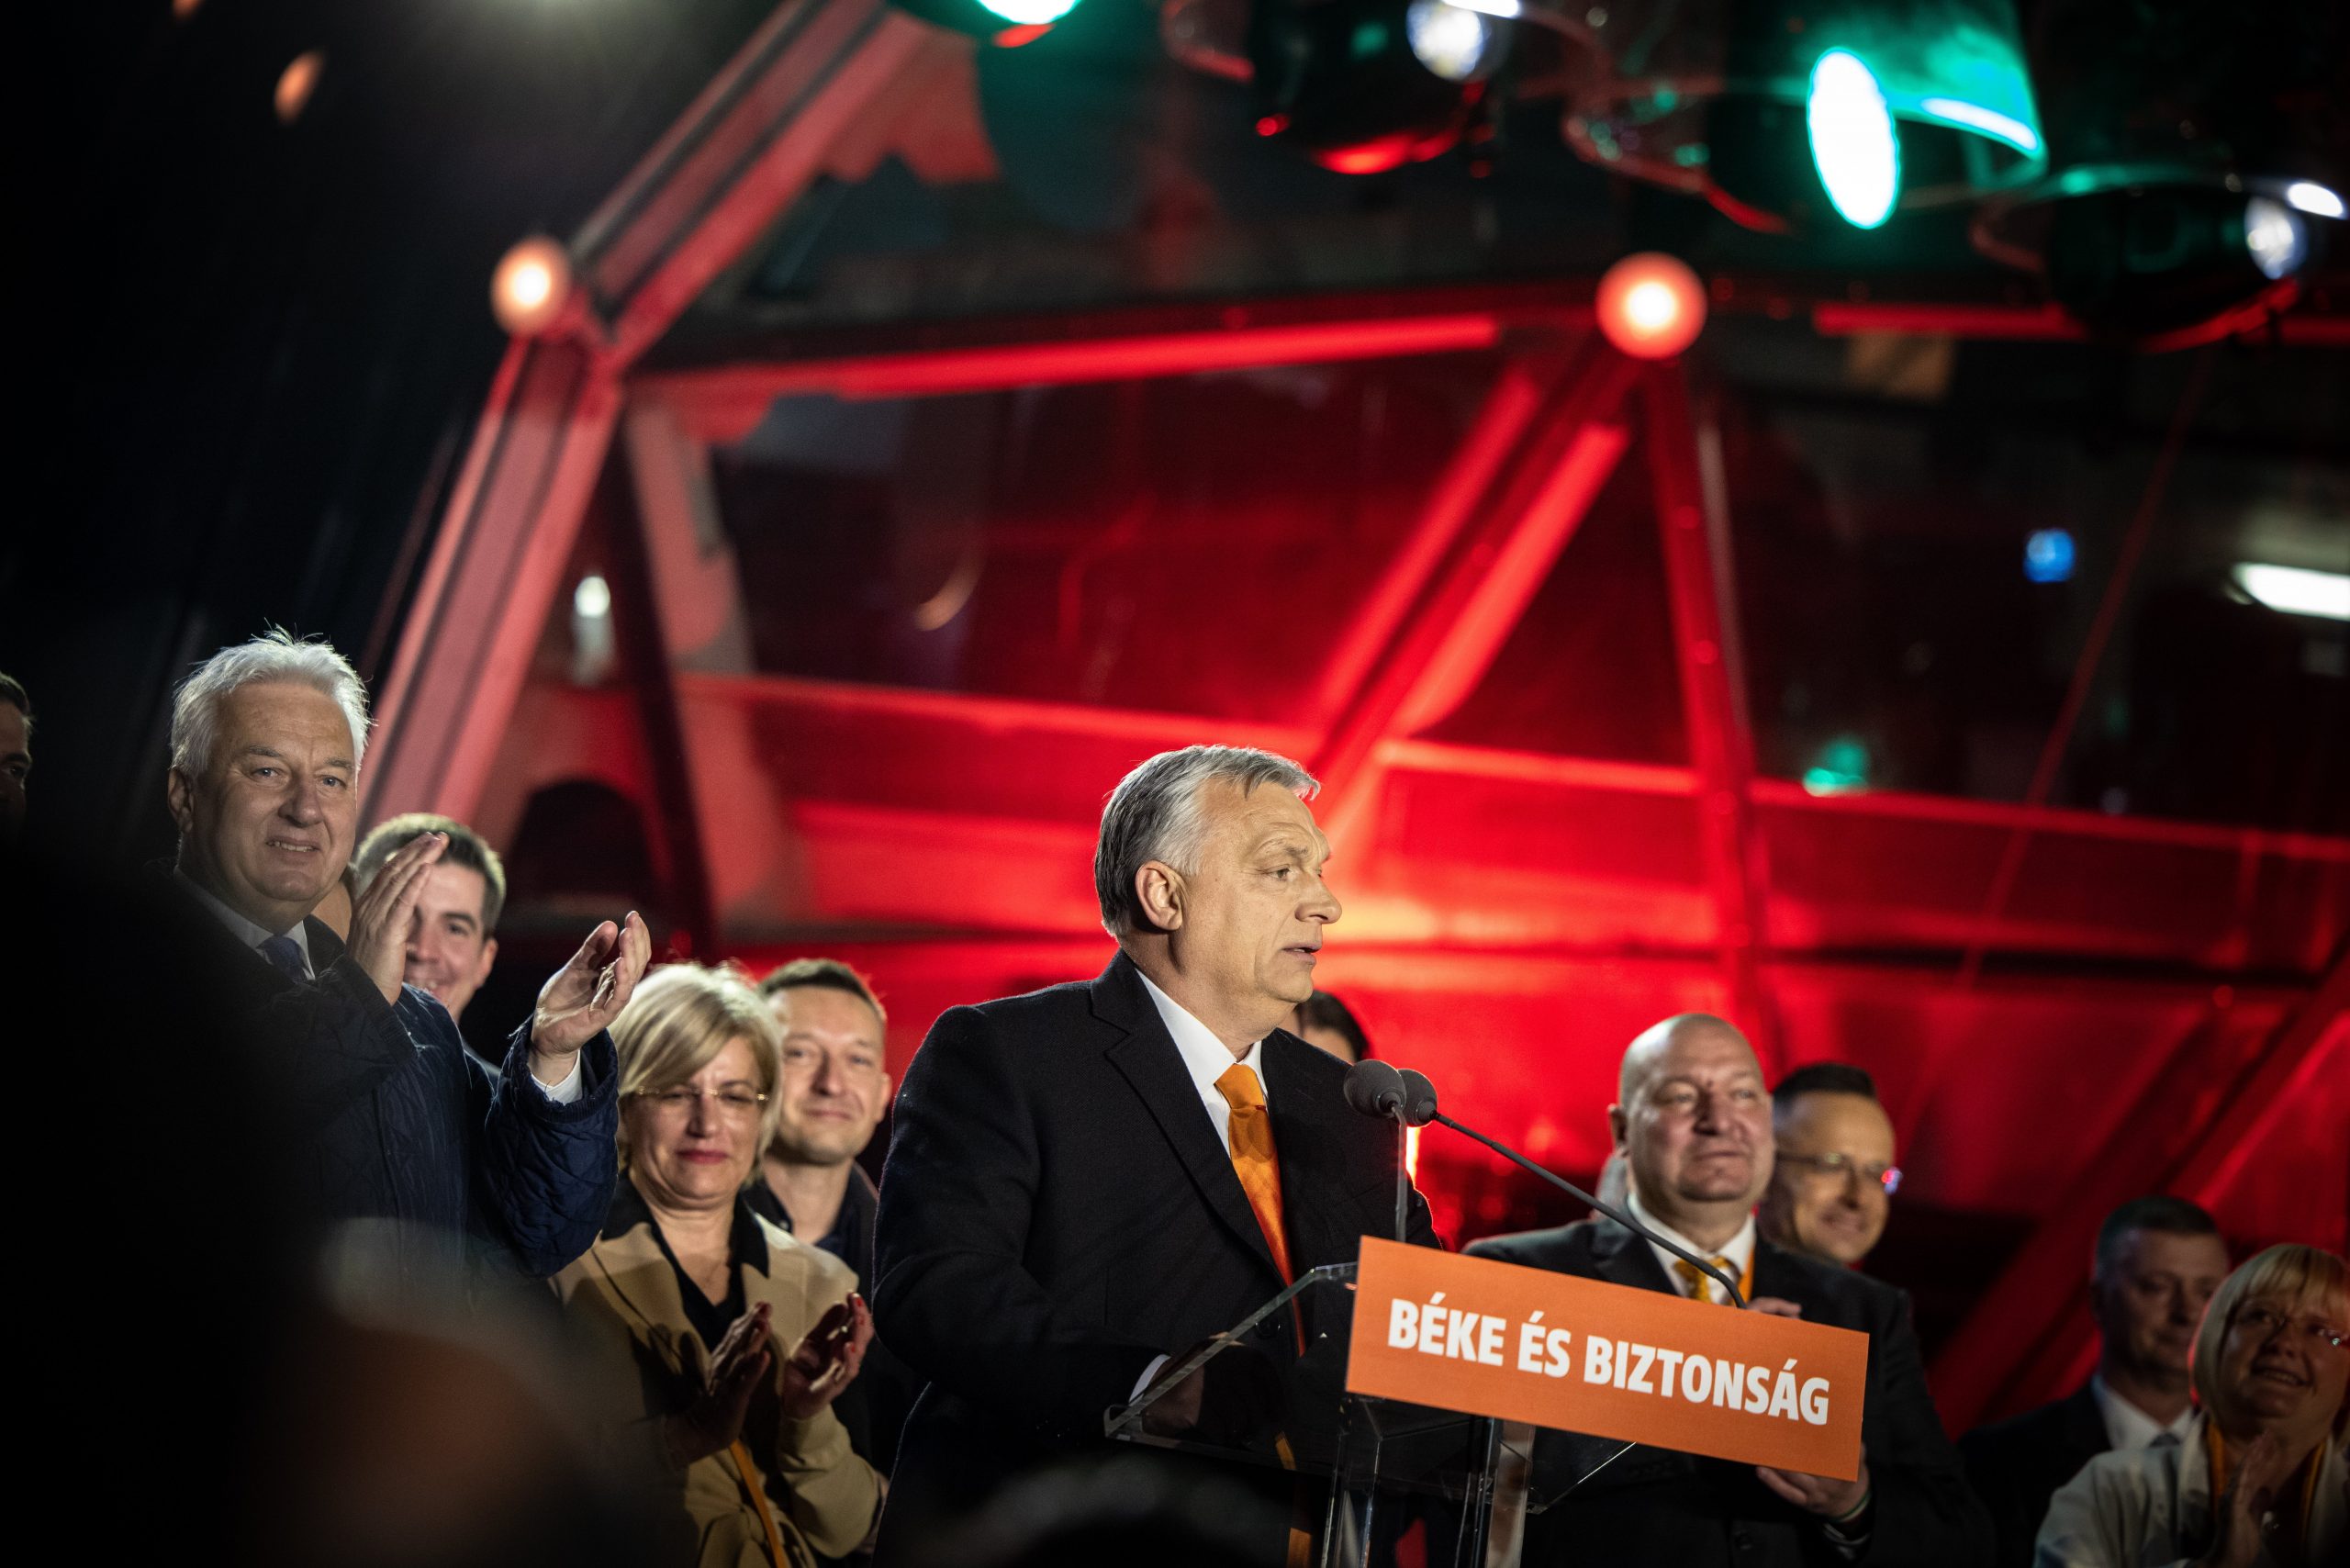 Orbán's electoral victory significantly increases the share price of companies linked to Fidesz